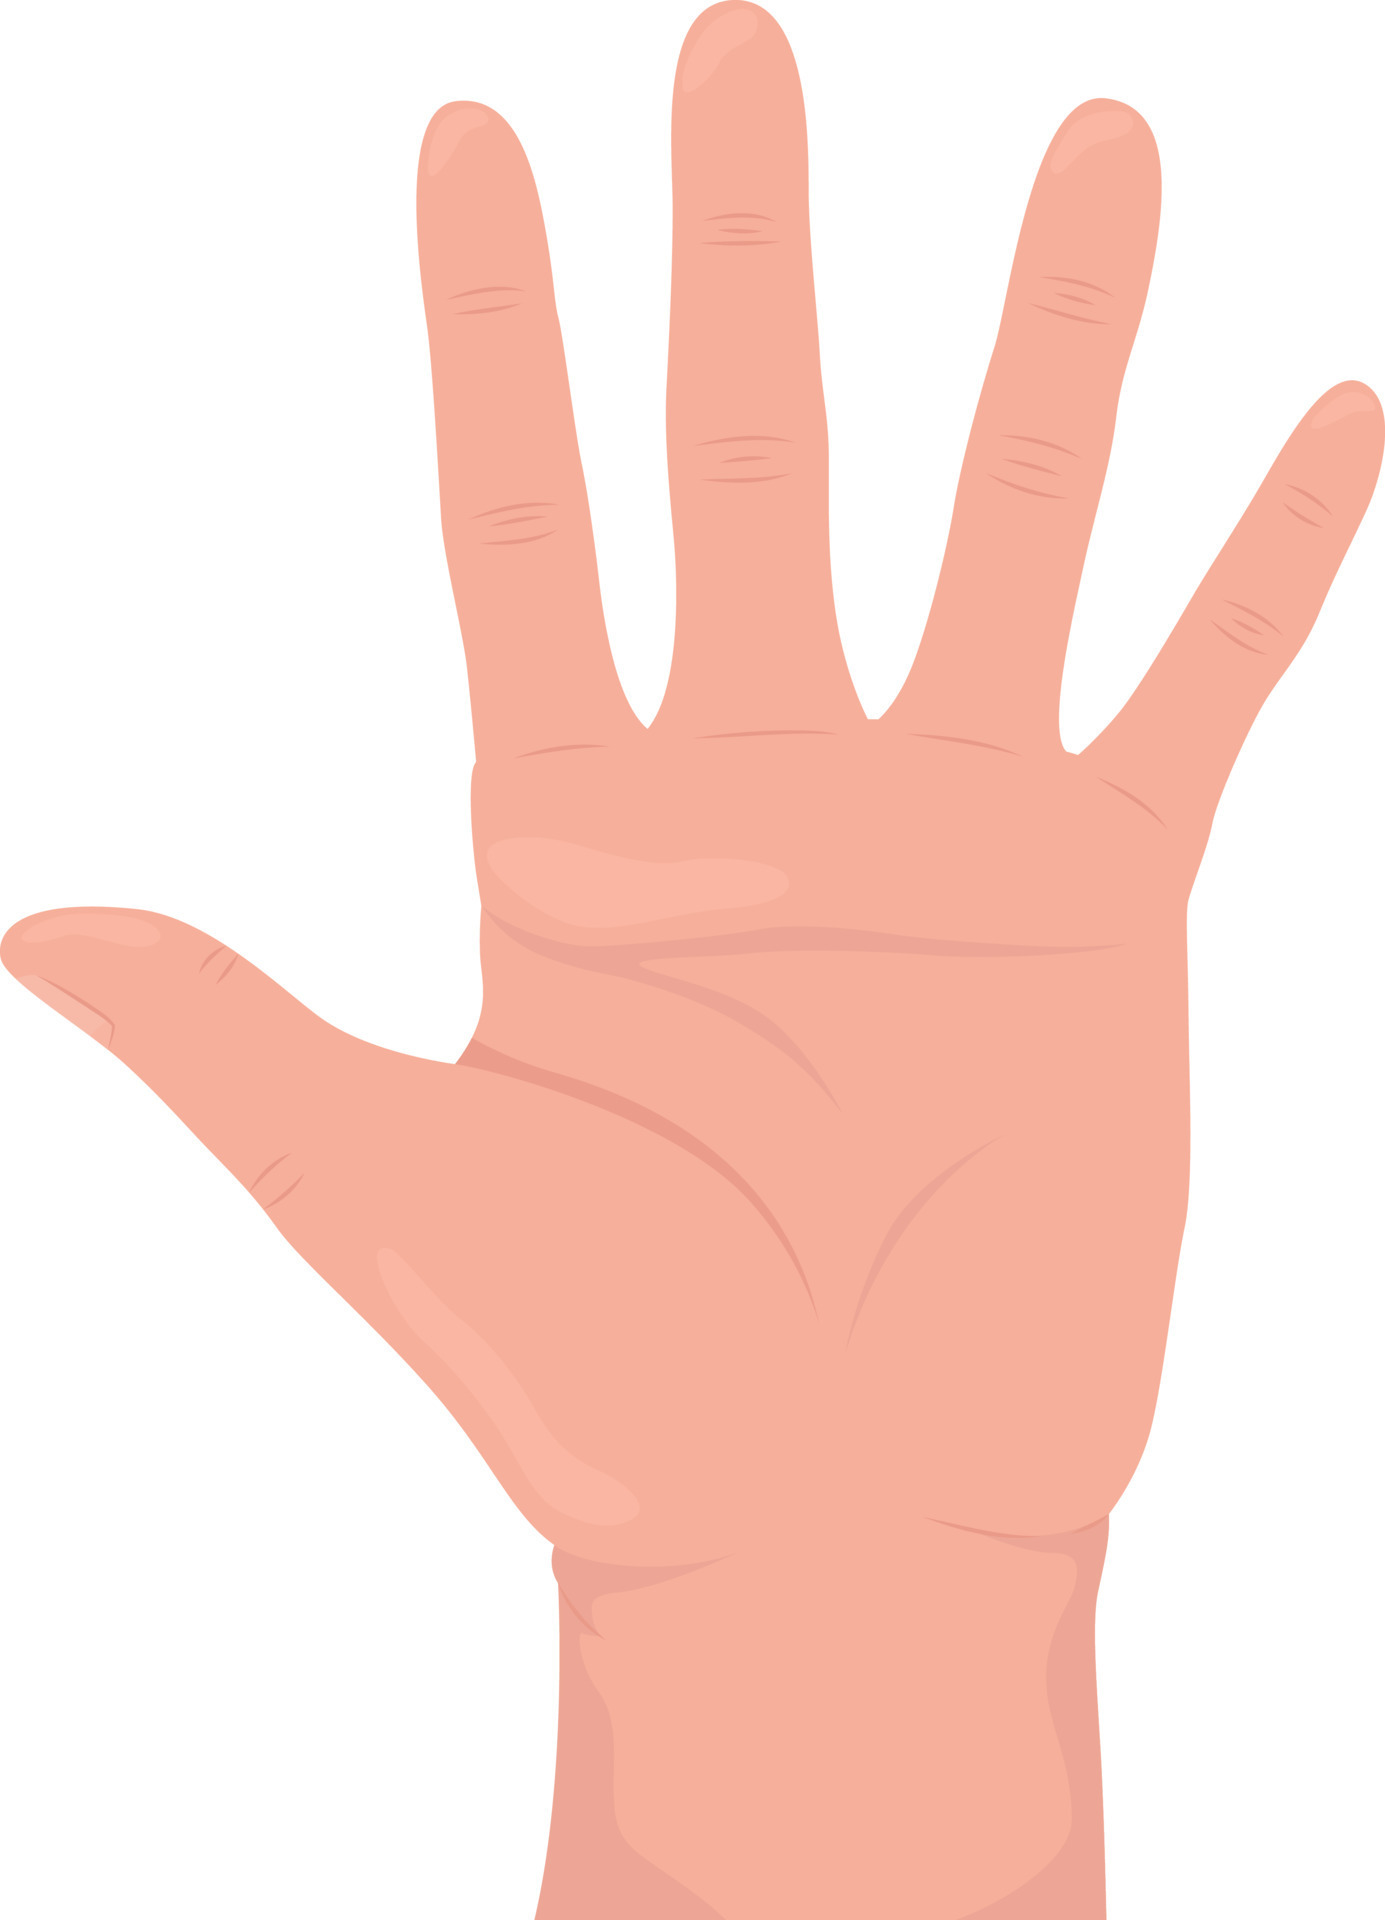 Palm with spread fingers semi flat color vector hand gesture. Editable pose. body part on white. Stop and restriction cartoon style illustration for web graphic design, sticker pack 10503729